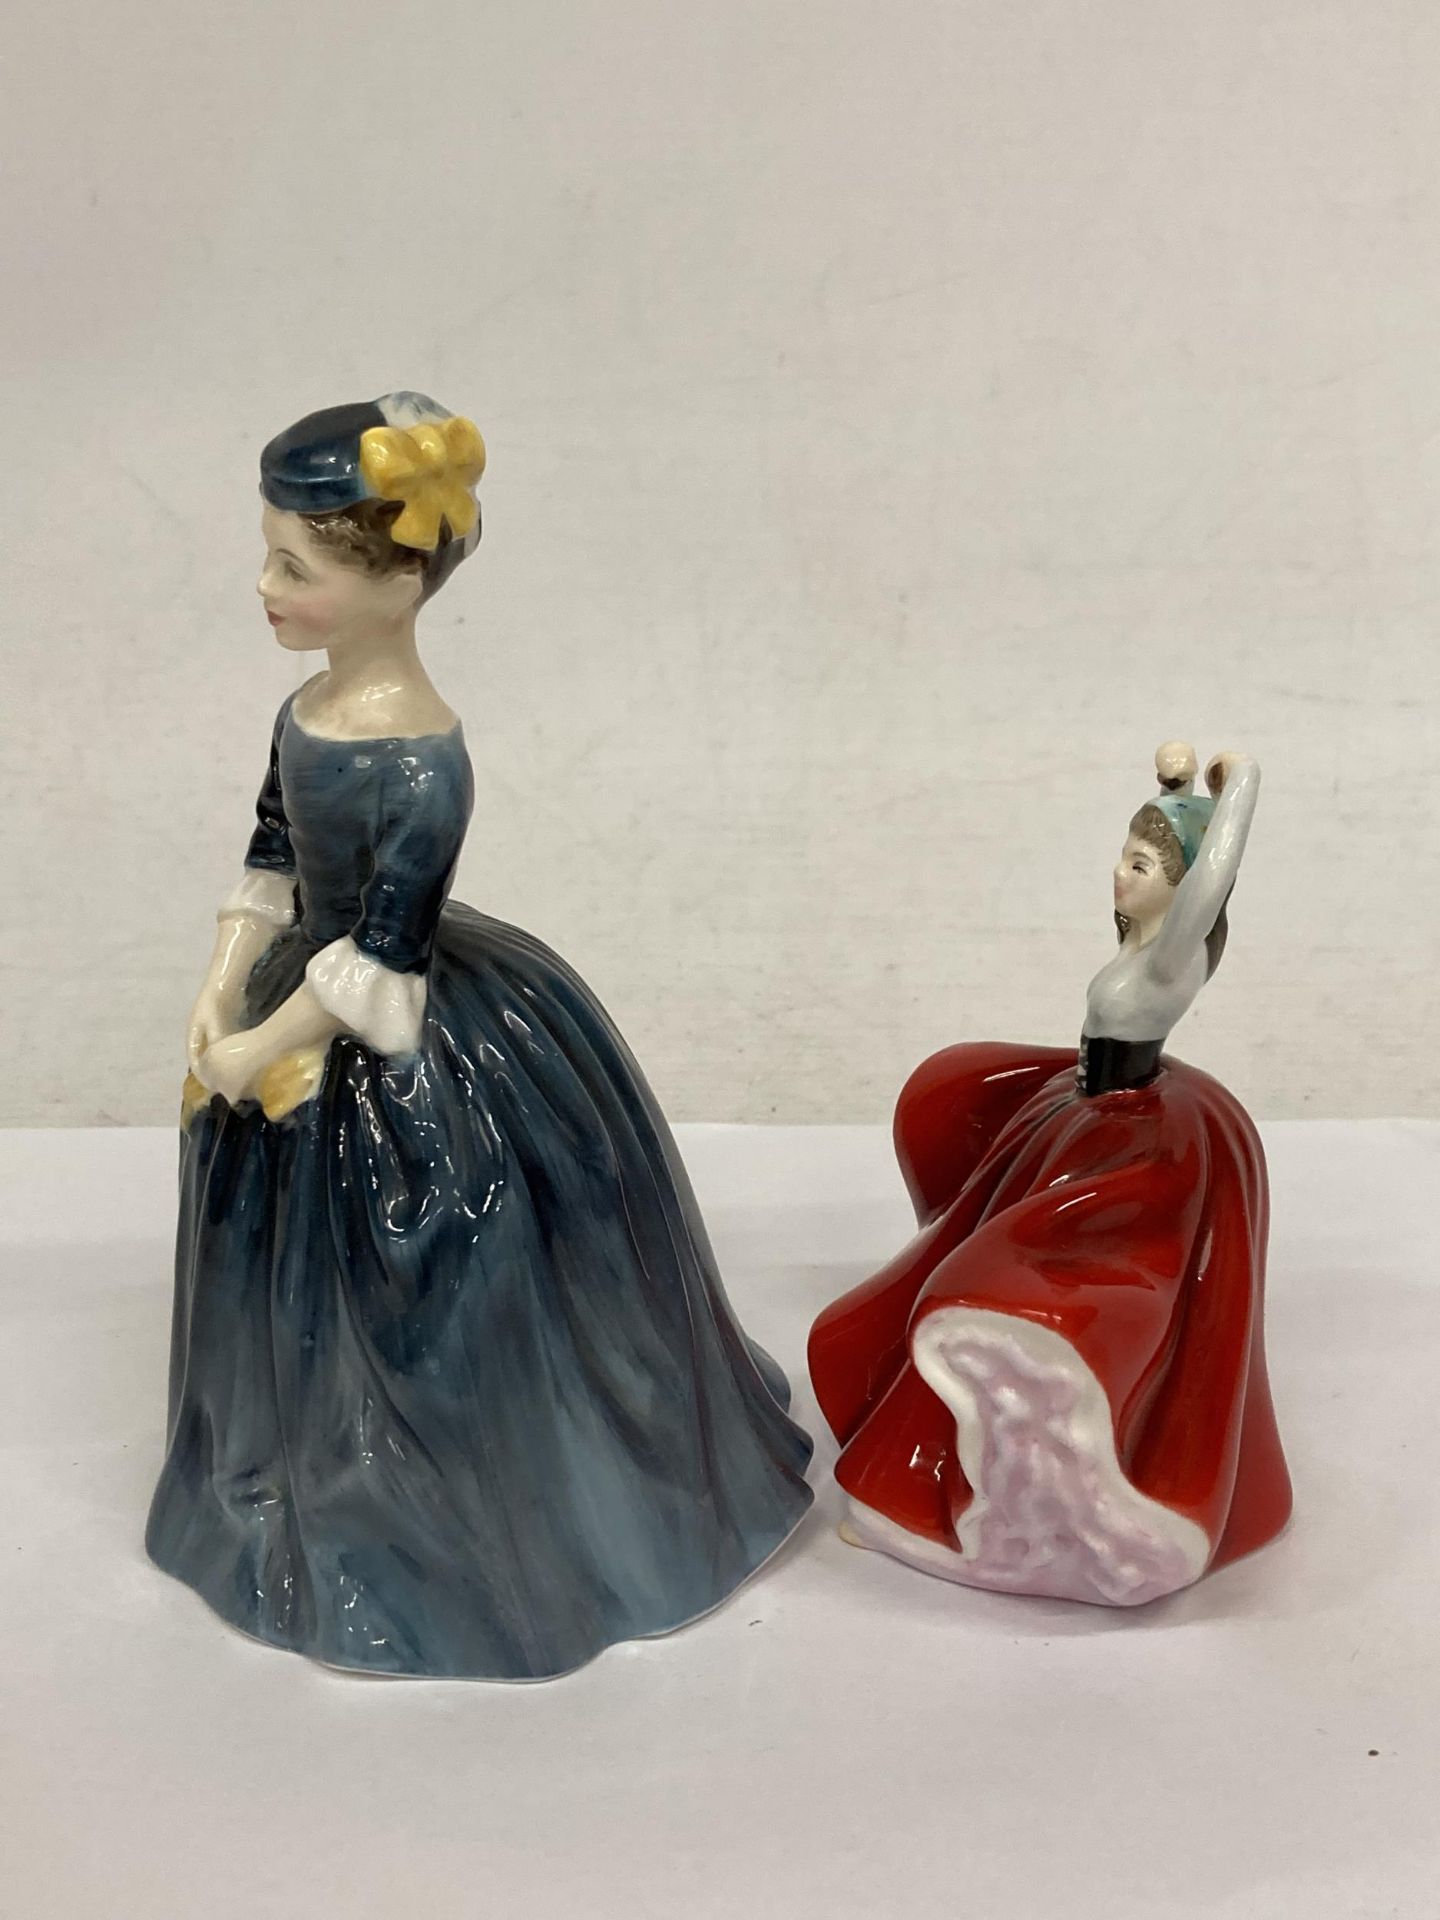 TWO ROYAL DOULTON FIGURINES ROYAL DOULTON MINIATURE "KAREN" HN3270 AND "CHERIE" HN2341 - Image 3 of 4